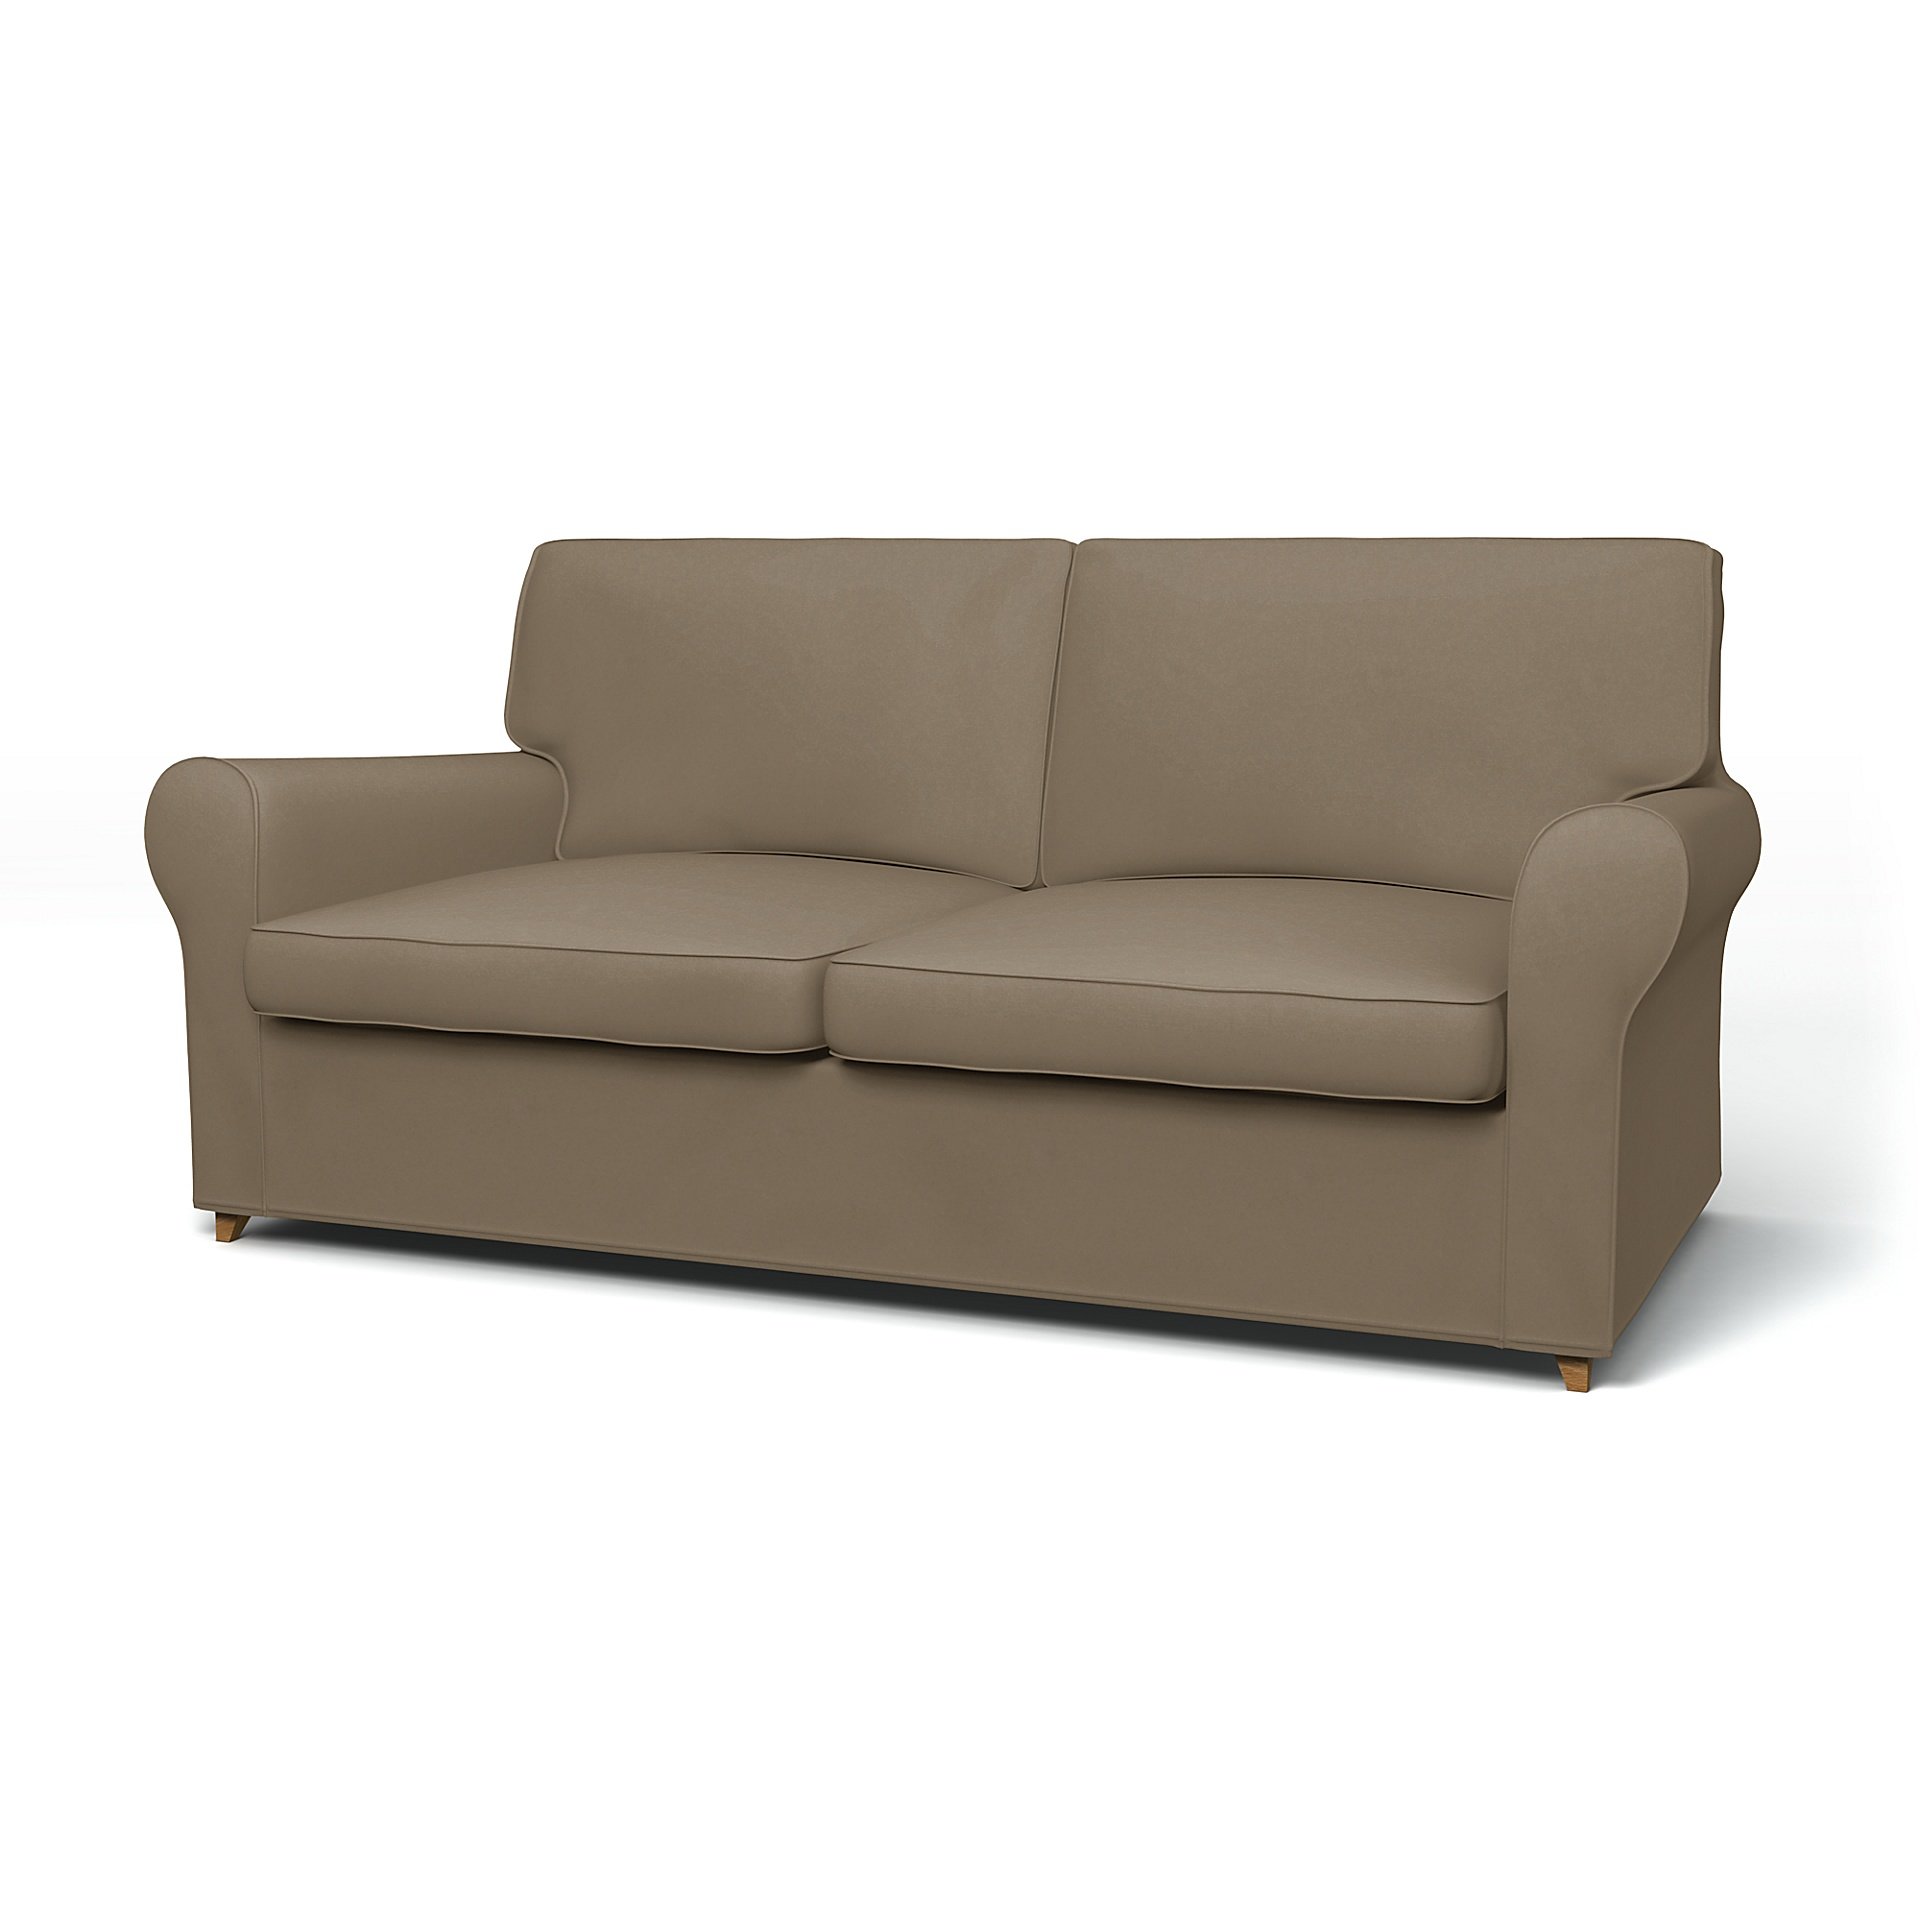 IKEA - Angby Sofa Bed Cover, Taupe, Velvet - Bemz